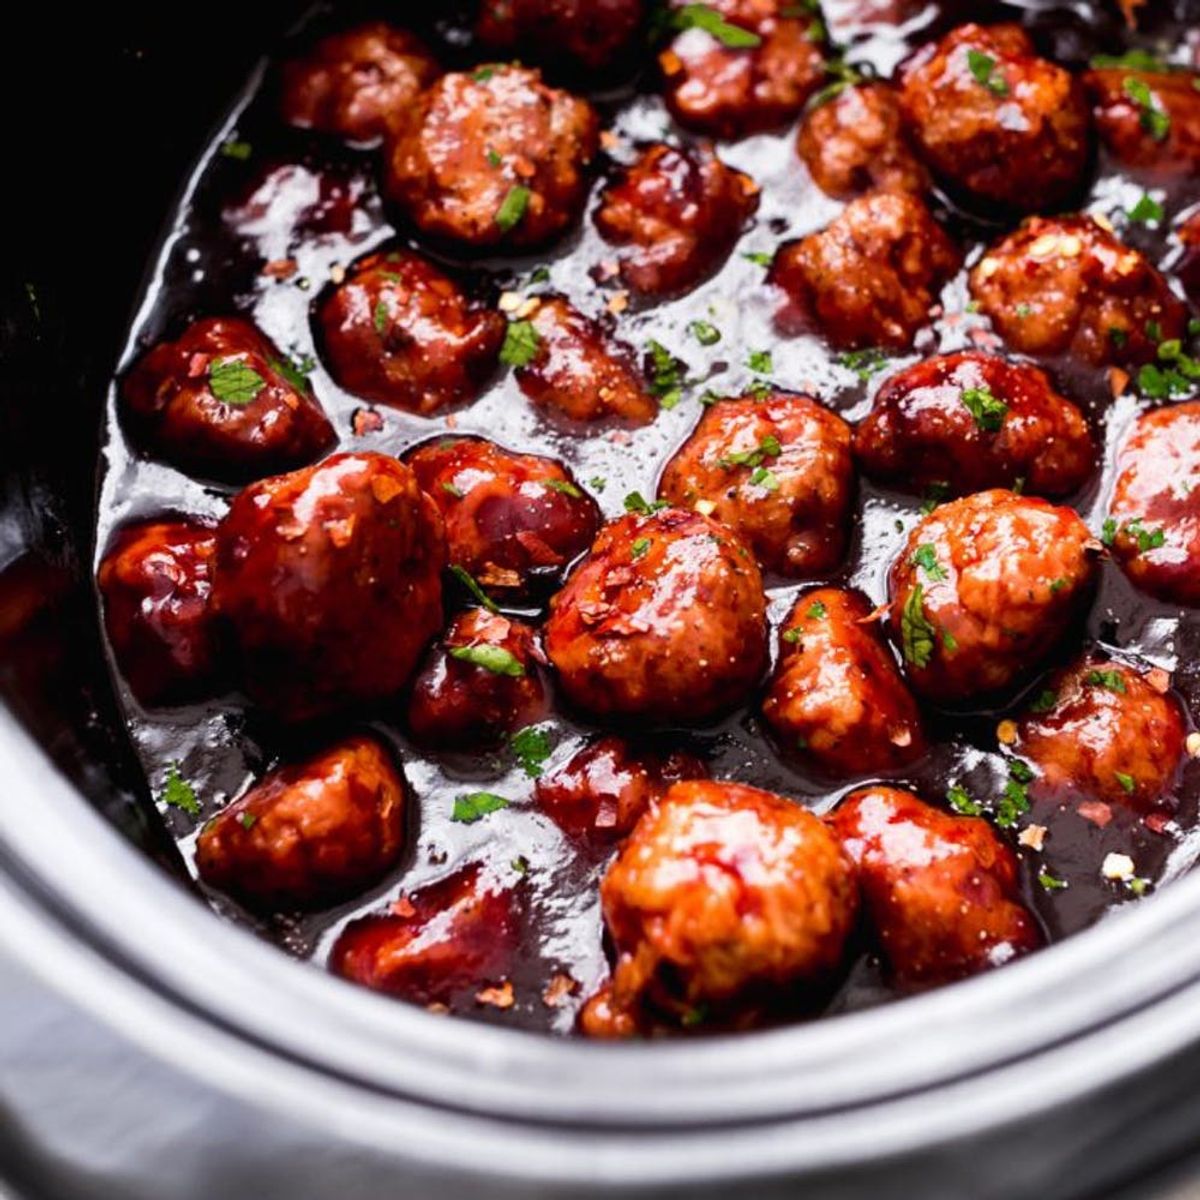 17 Fancy Slow-Cooker Appetizer Recipes to Wow Guests